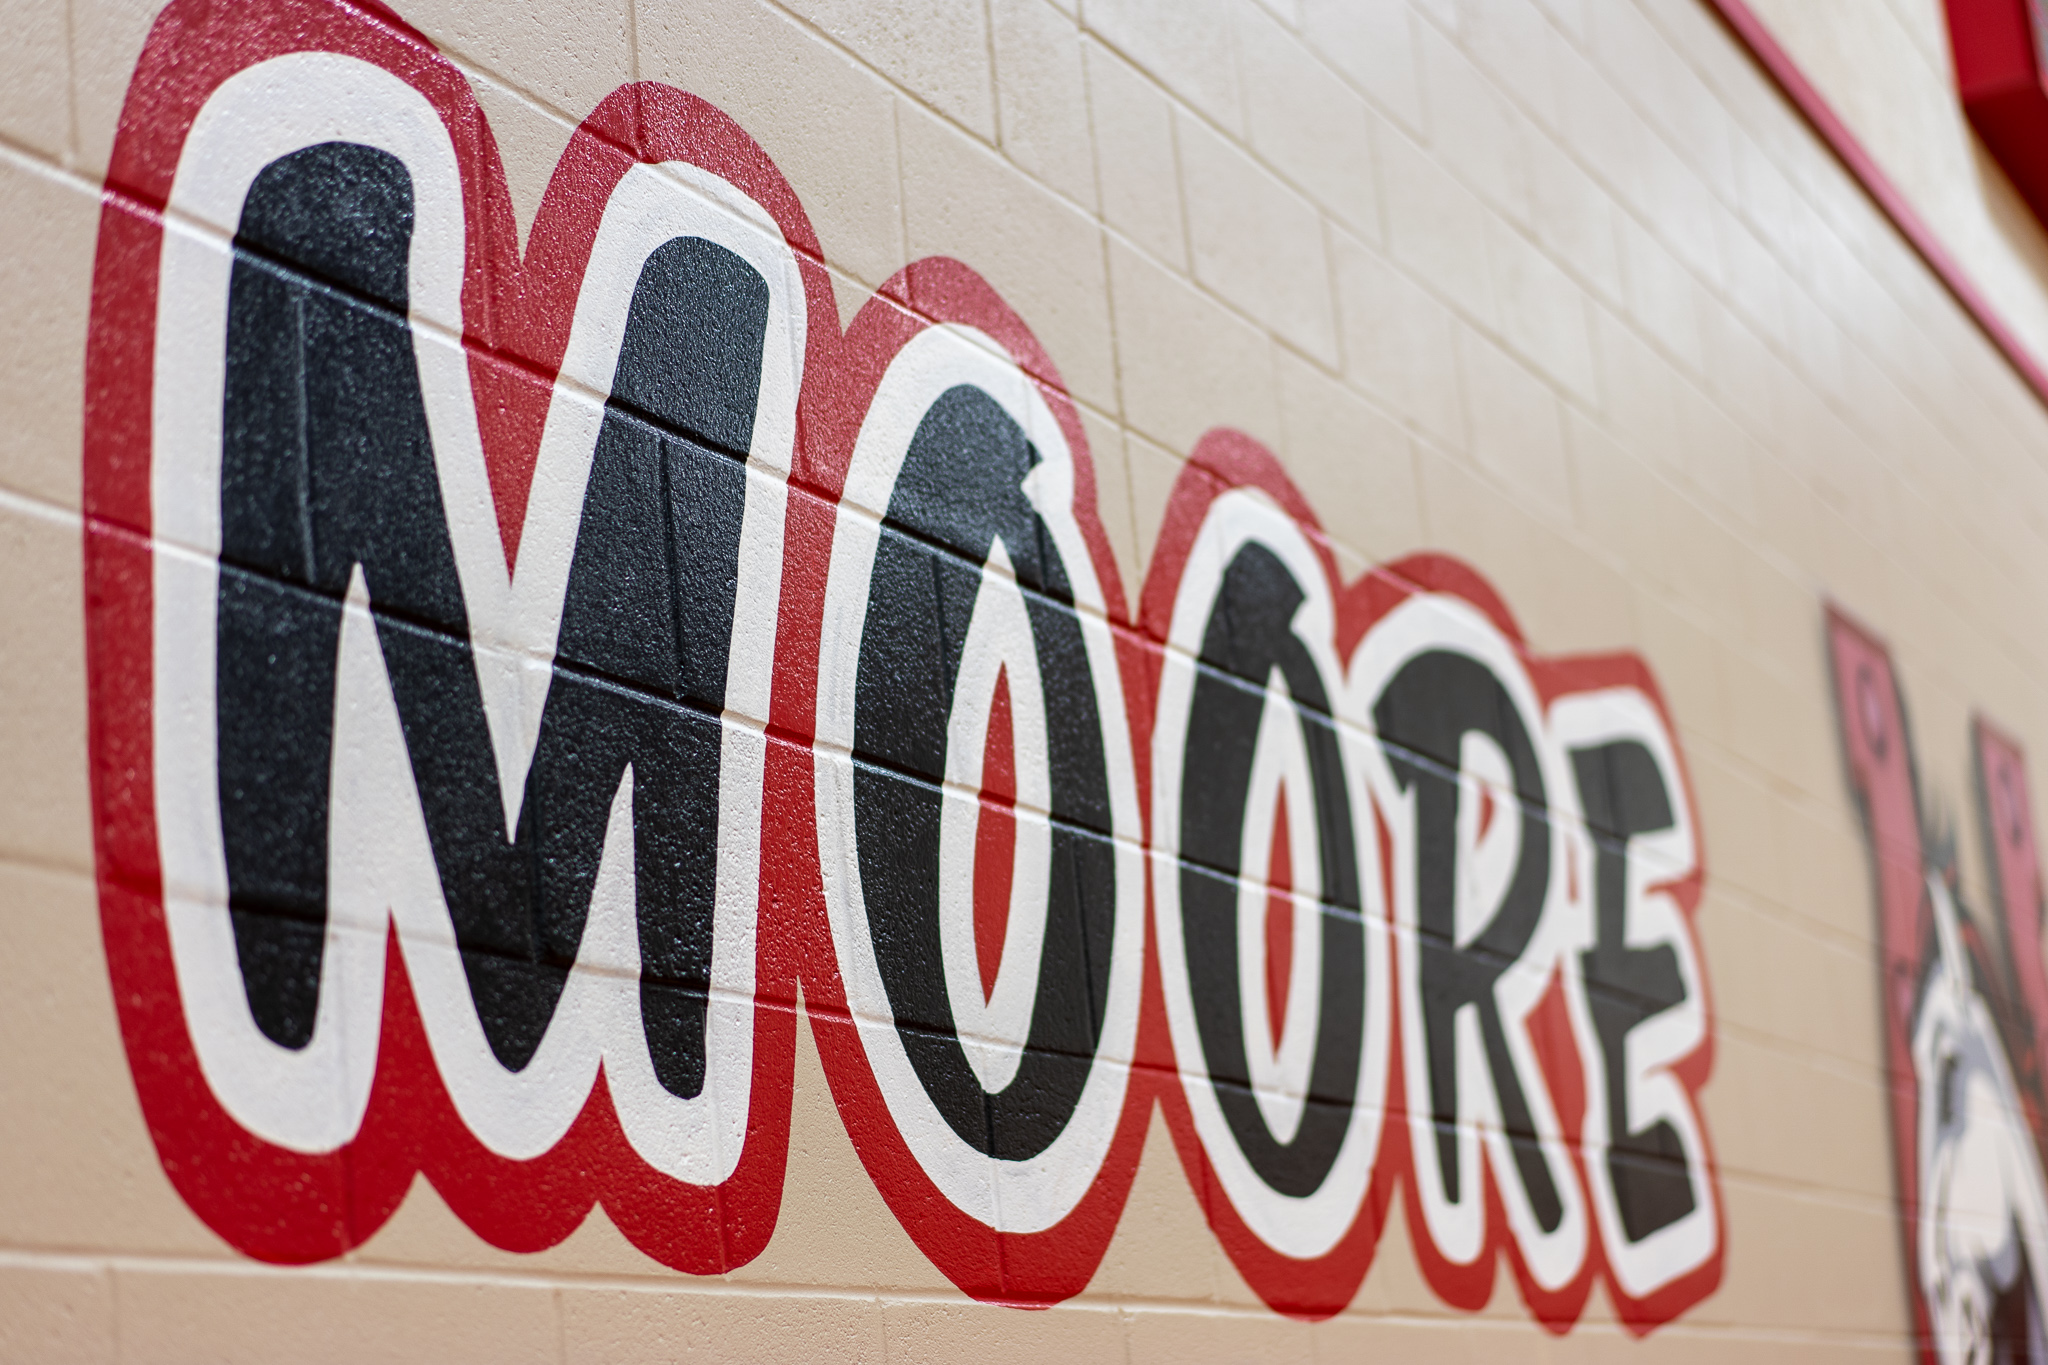 moore lettering on wall